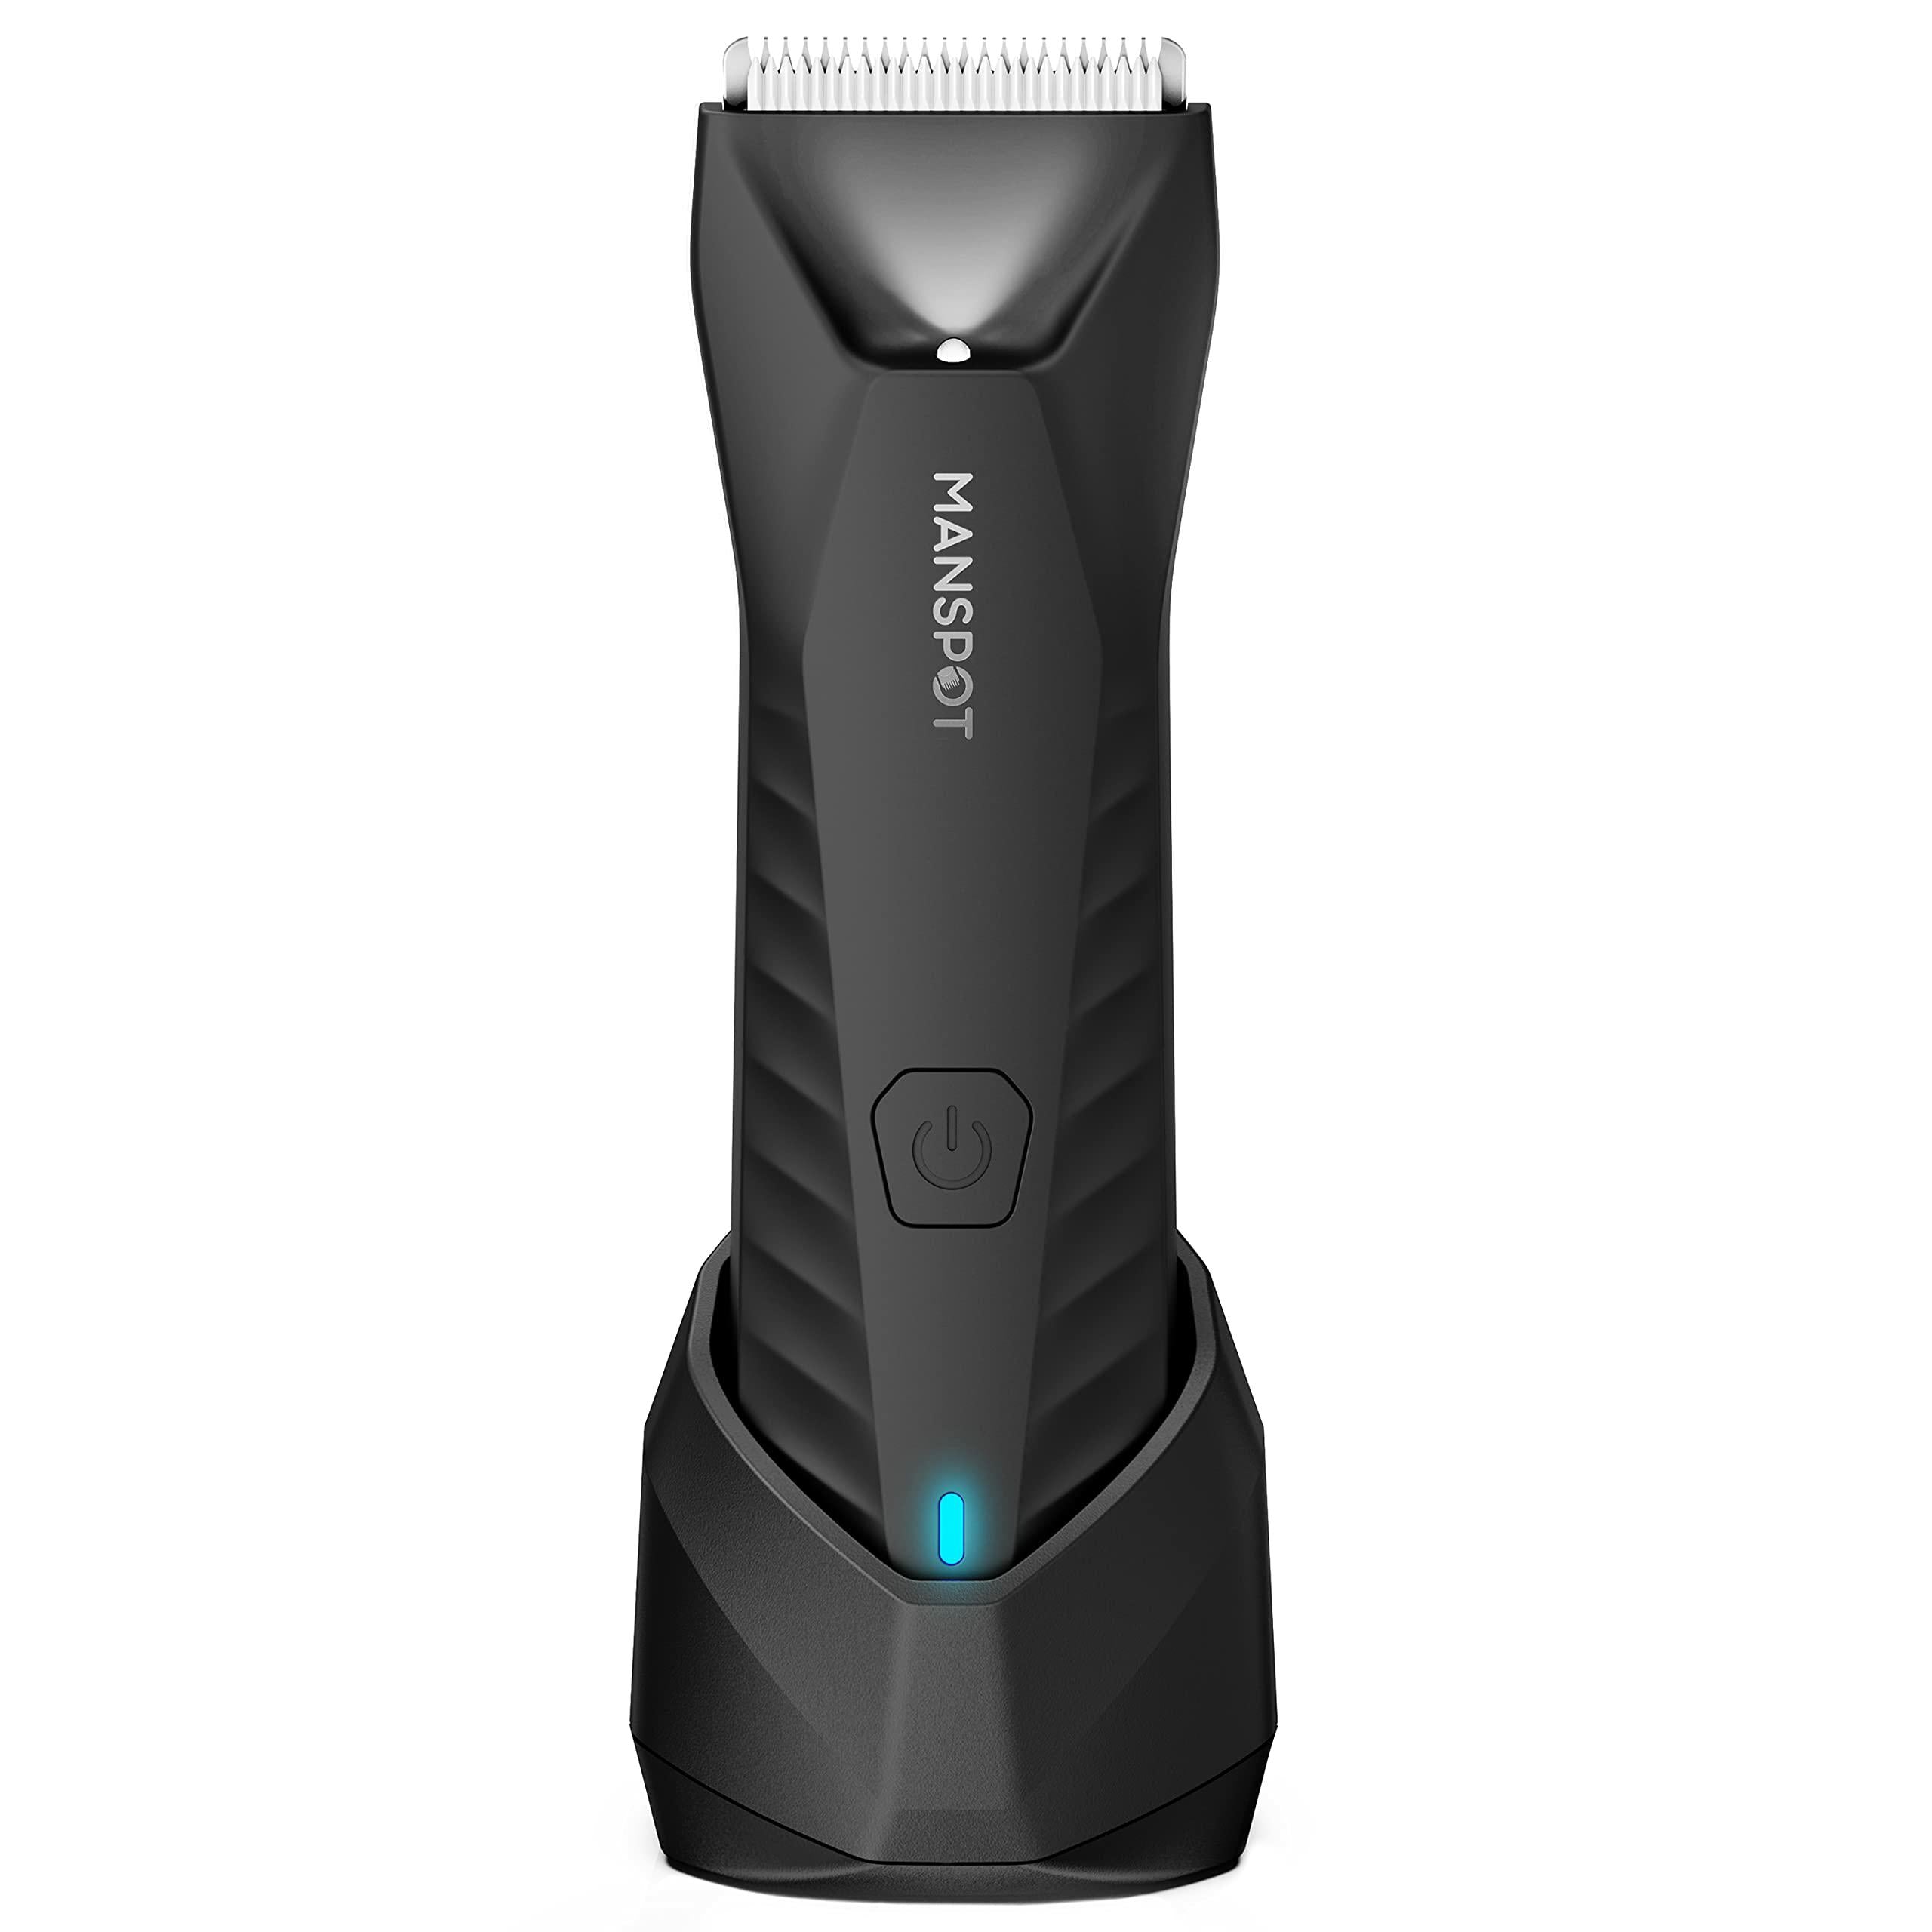  MANSPOT Groin Hair Trimmer for Men, Electric Ball  Trimmer/Shaver, Replaceable Ceramic Blade Heads, Waterproof Wet/Dry Groin &  Body Shaver Groomer, 90 Minutes Shaving After Fully Charged : Beauty &  Personal Care